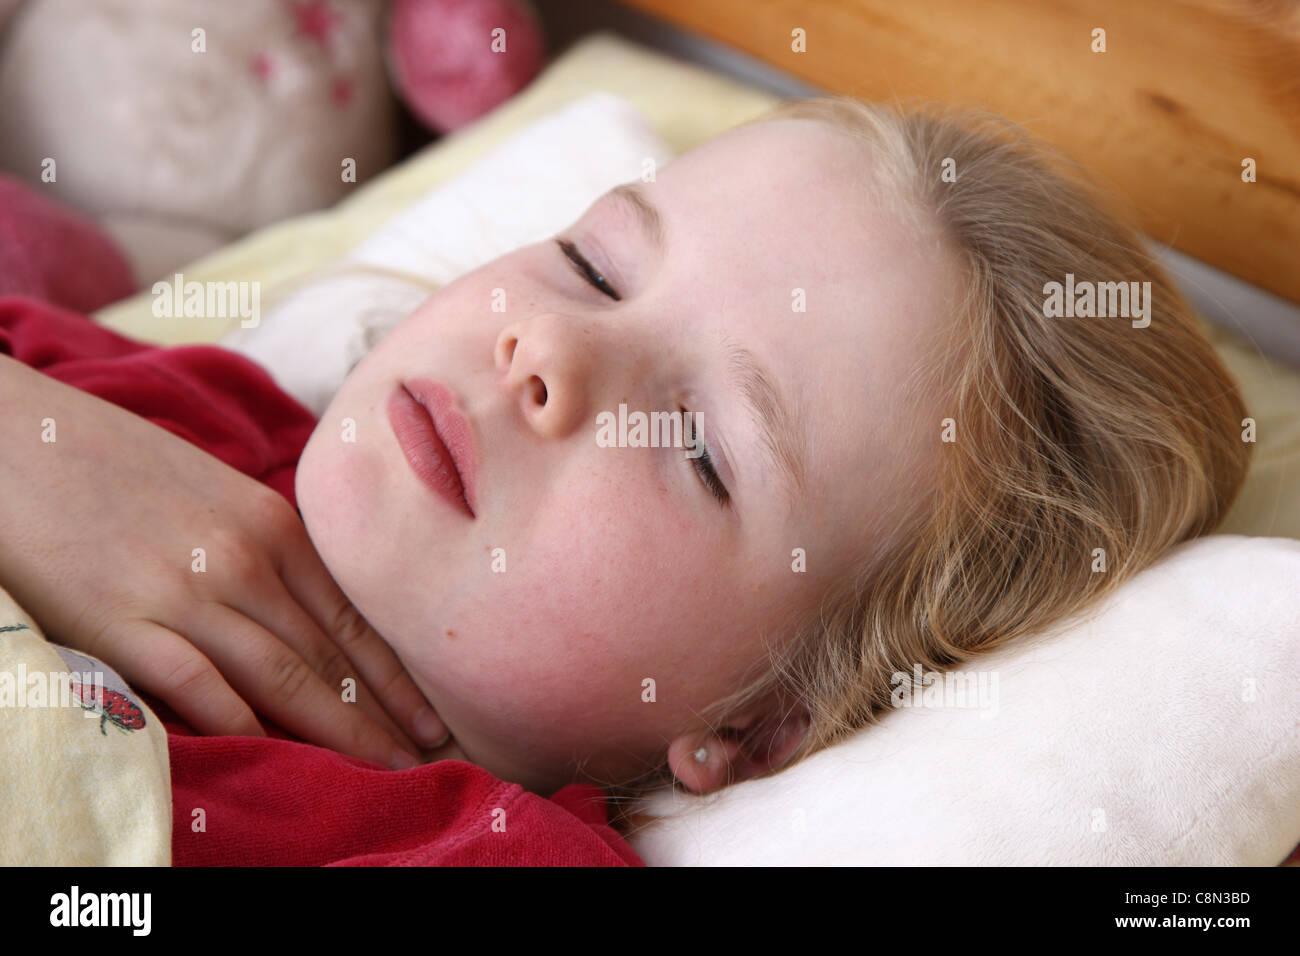 Young girl, 10 years old, lies sick in bed with a flu. Having a sore throat. Stock Photo